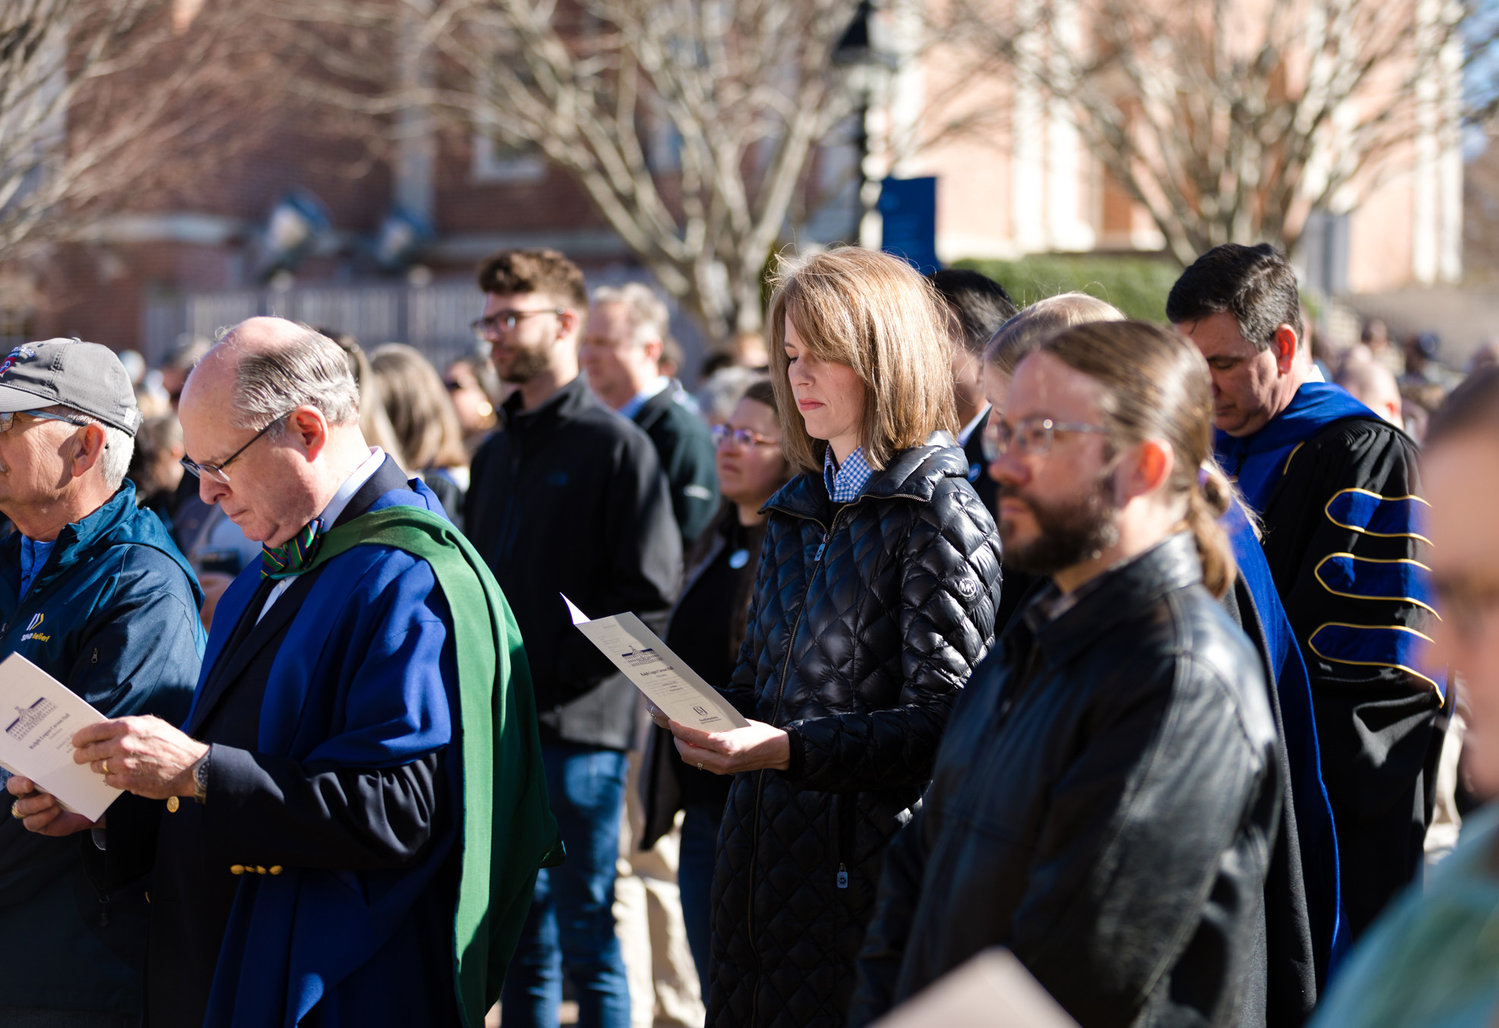 Attendees participate in a dedication ceremony outside Carson Hall, where Southeastern unveiled the renamed building as well as two new bronze plaques commemorating Carson’s legacy. (Photo/Southeastern Baptist Theological Seminary)